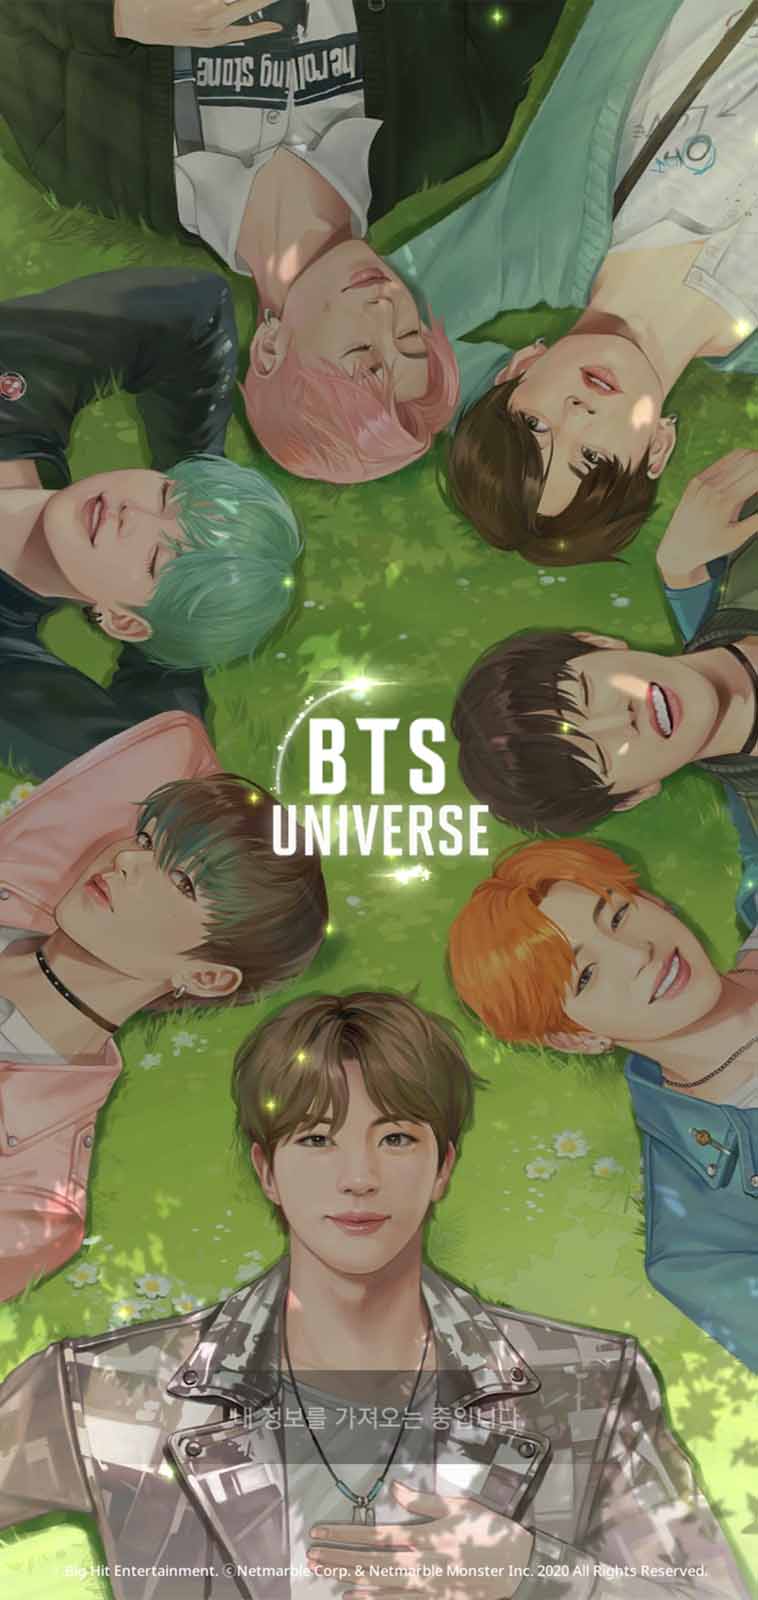 We all need a reason to smile in 2020, so BTS has us covered. Here's why you should check out their new mobile game.